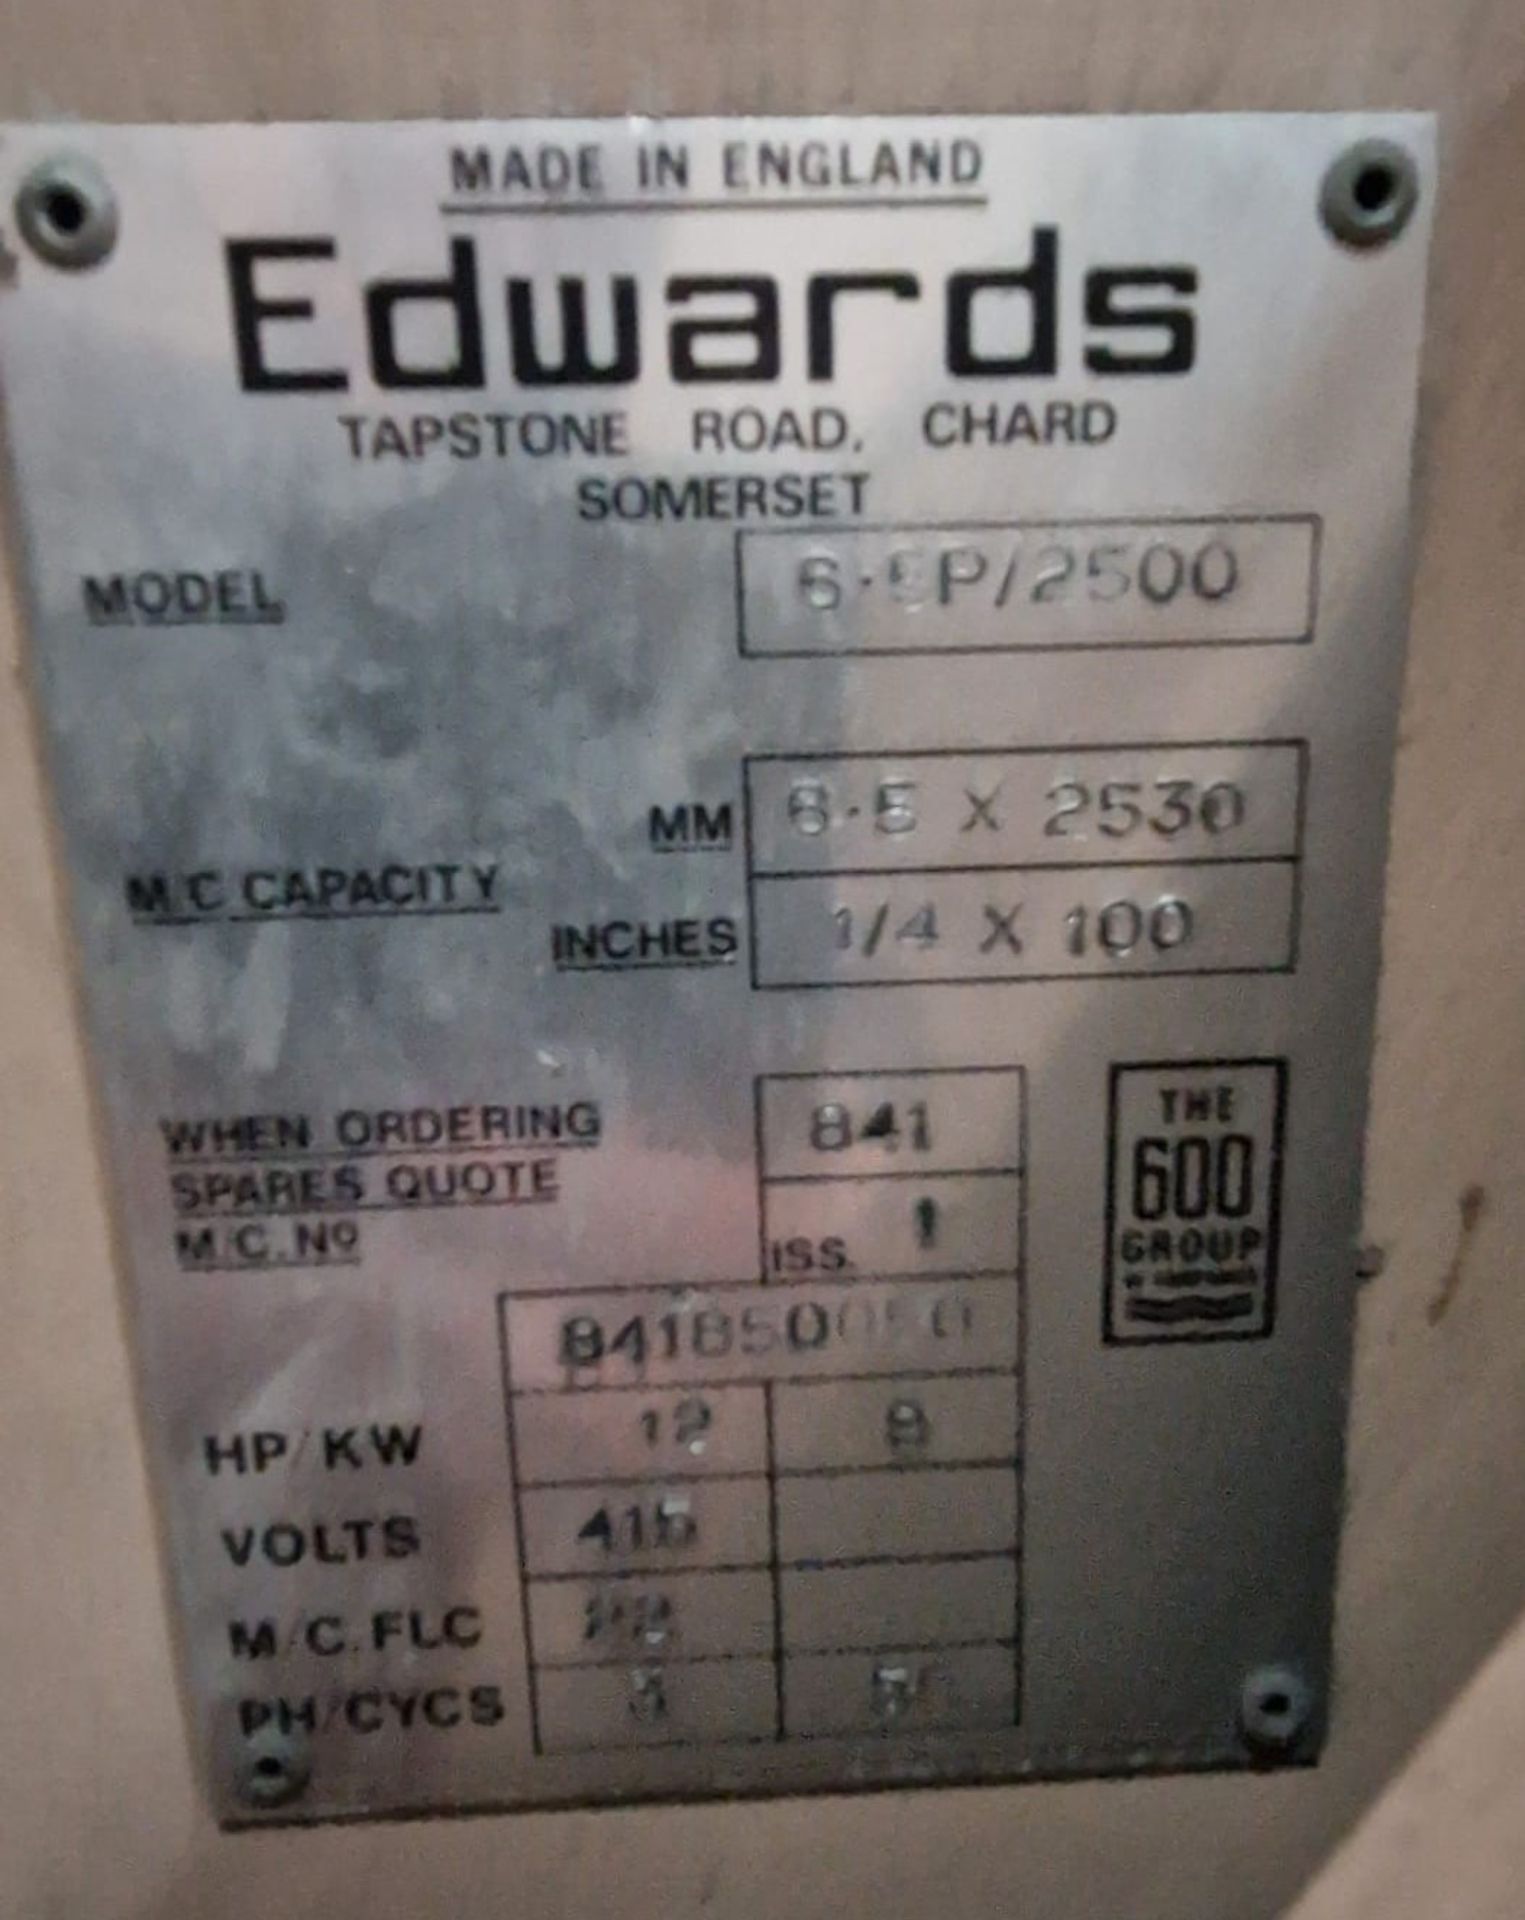 Edwards Popular 6.5 x 2500 Power Guillotine - Image 9 of 10